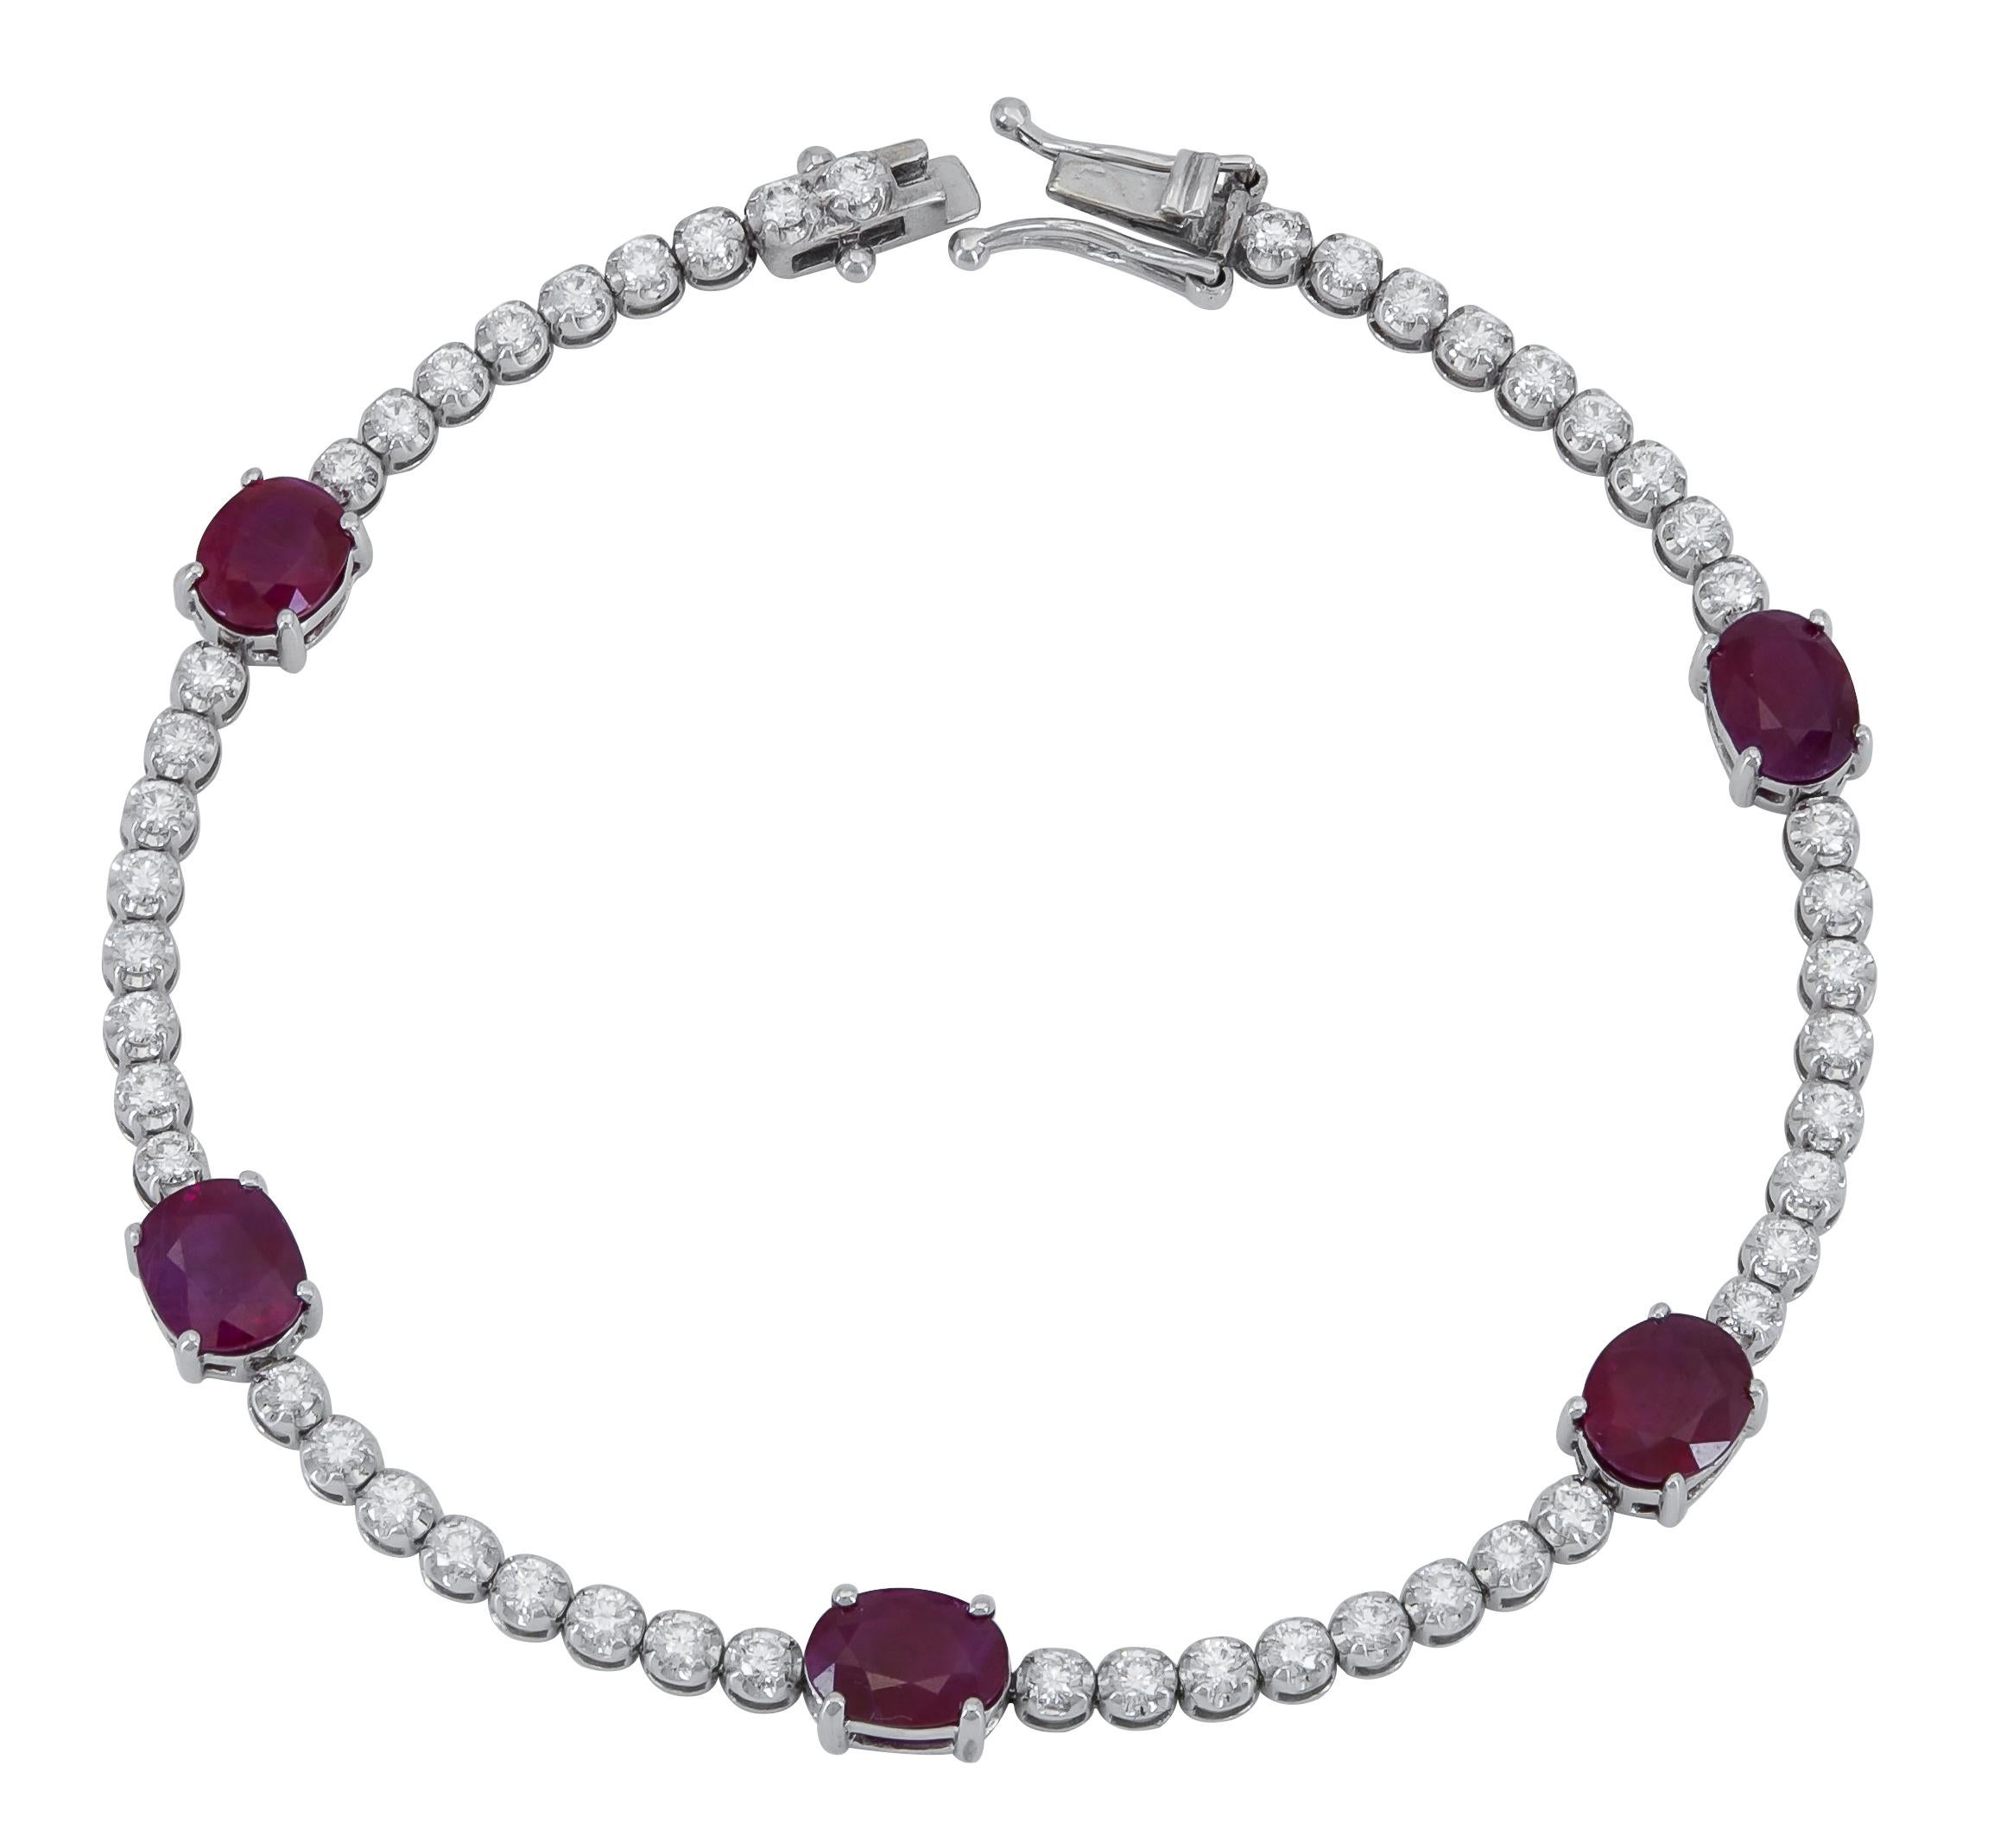 A classic tennis bracelet showcasing a row of round brilliant diamonds spaced evenly with five vibrant oval cut rubies.
Rubies weigh 9.77 carats total.
Diamonds weigh 1.39 carats total.
Dimensions: 7.00in (L) x 0.22in (W)

This item is part of our